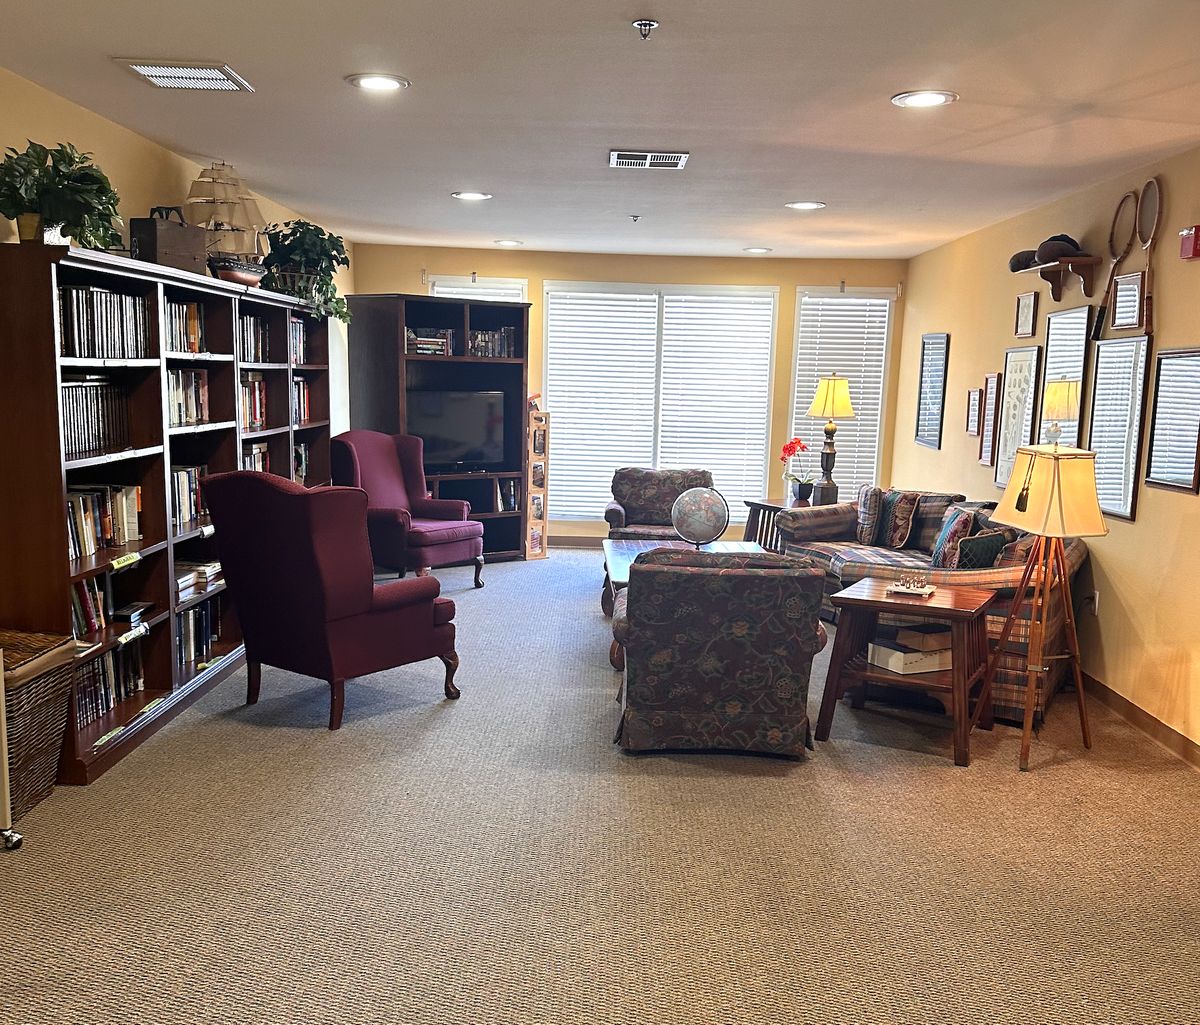 Interior view of Leisure Vale Assisted Living with modern decor, furniture, and a library.